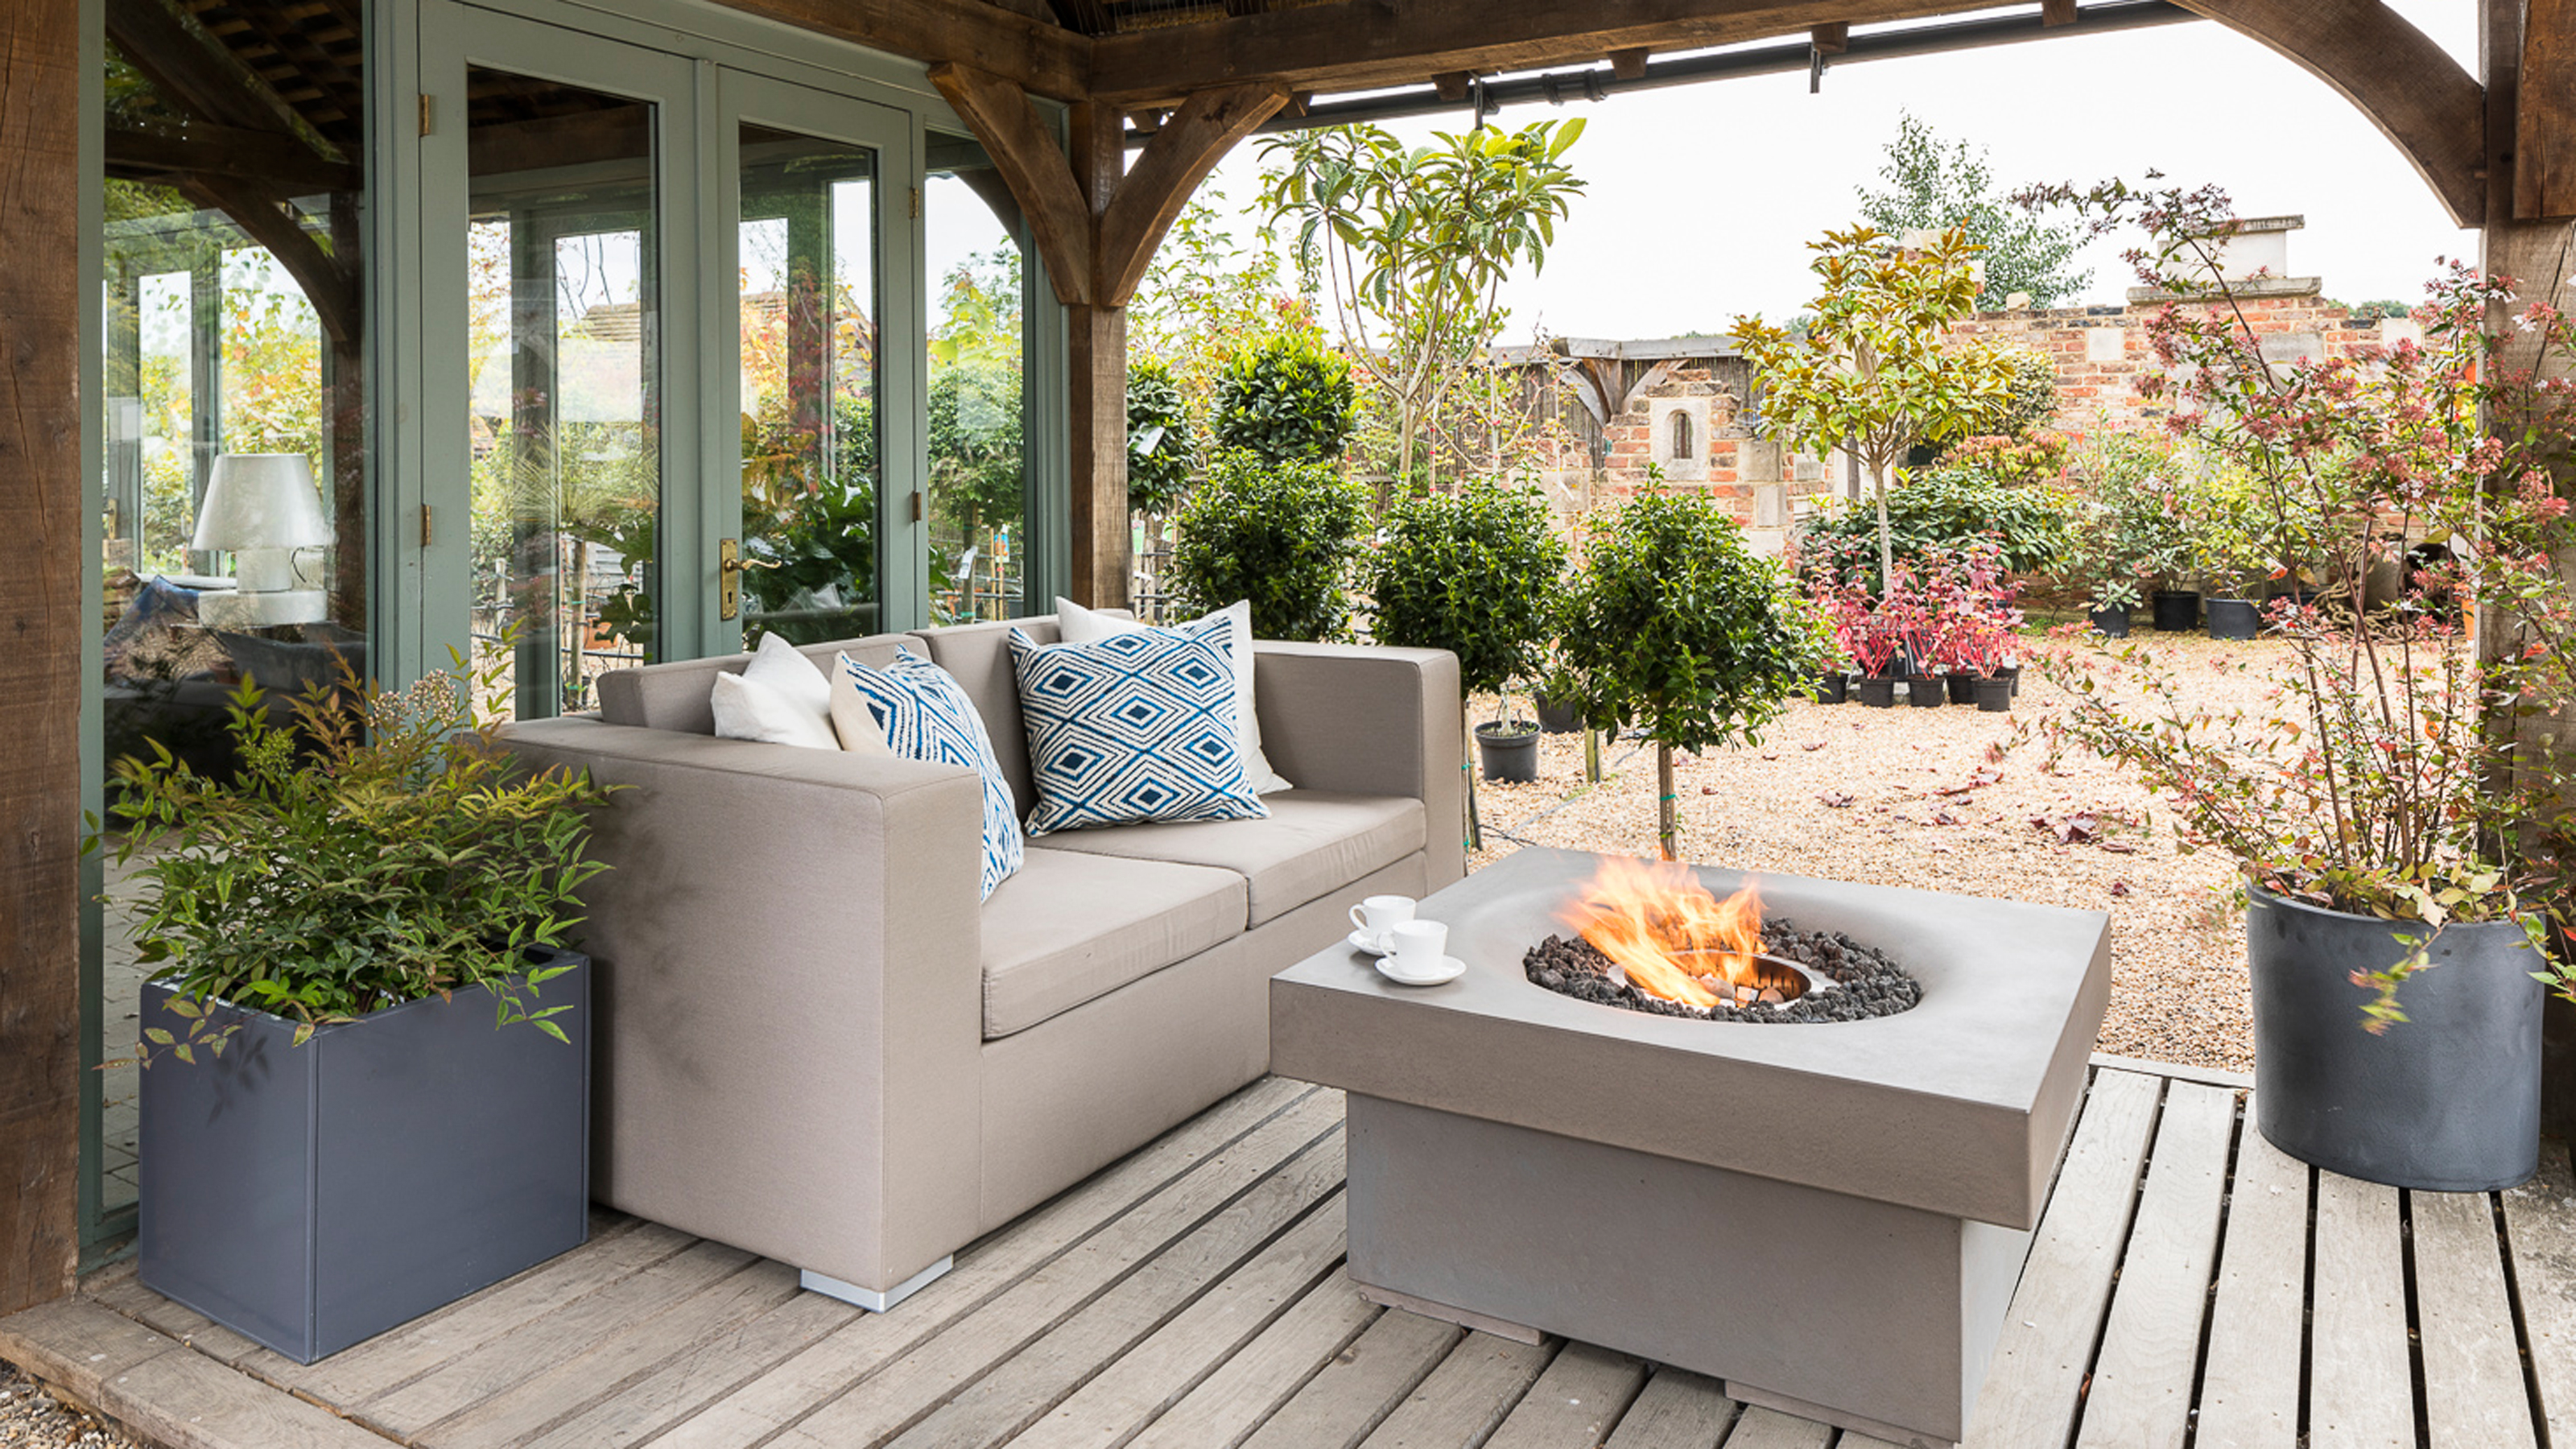 Create a Fantastic New Outdoor Space for Your Home with the Disco Deck